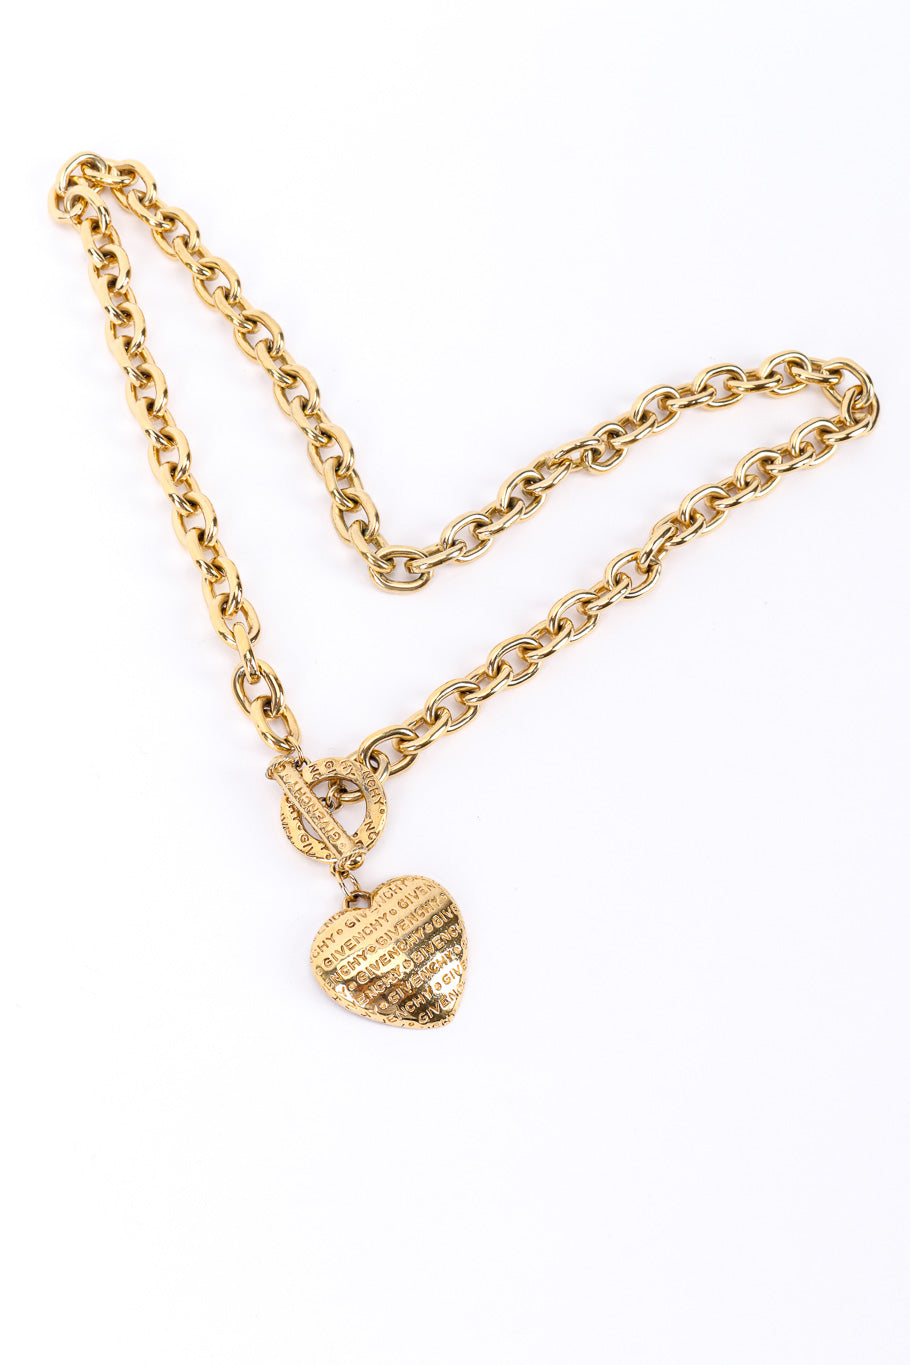 Heart charm necklace by Givenchy on white background in heart shape @recessla